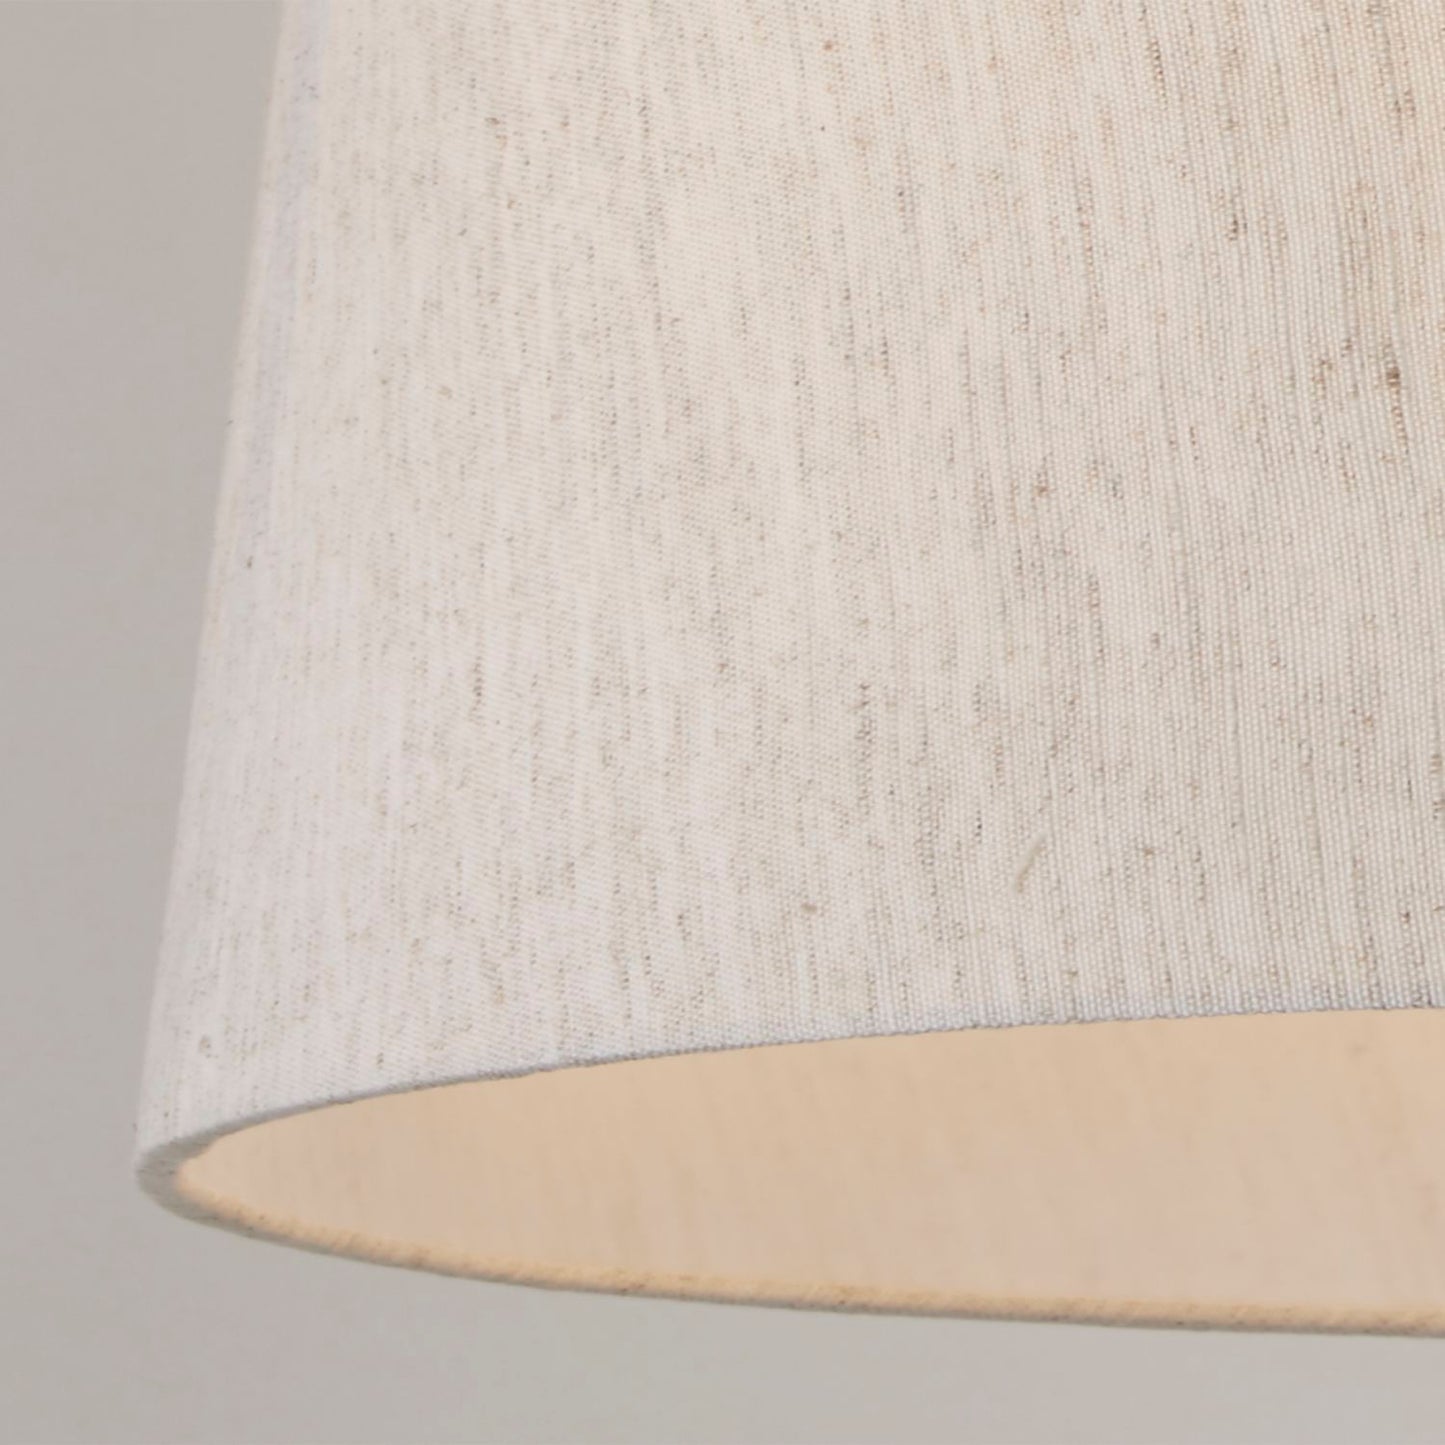 Taupe Tapered Linen Light Shade (40cm)